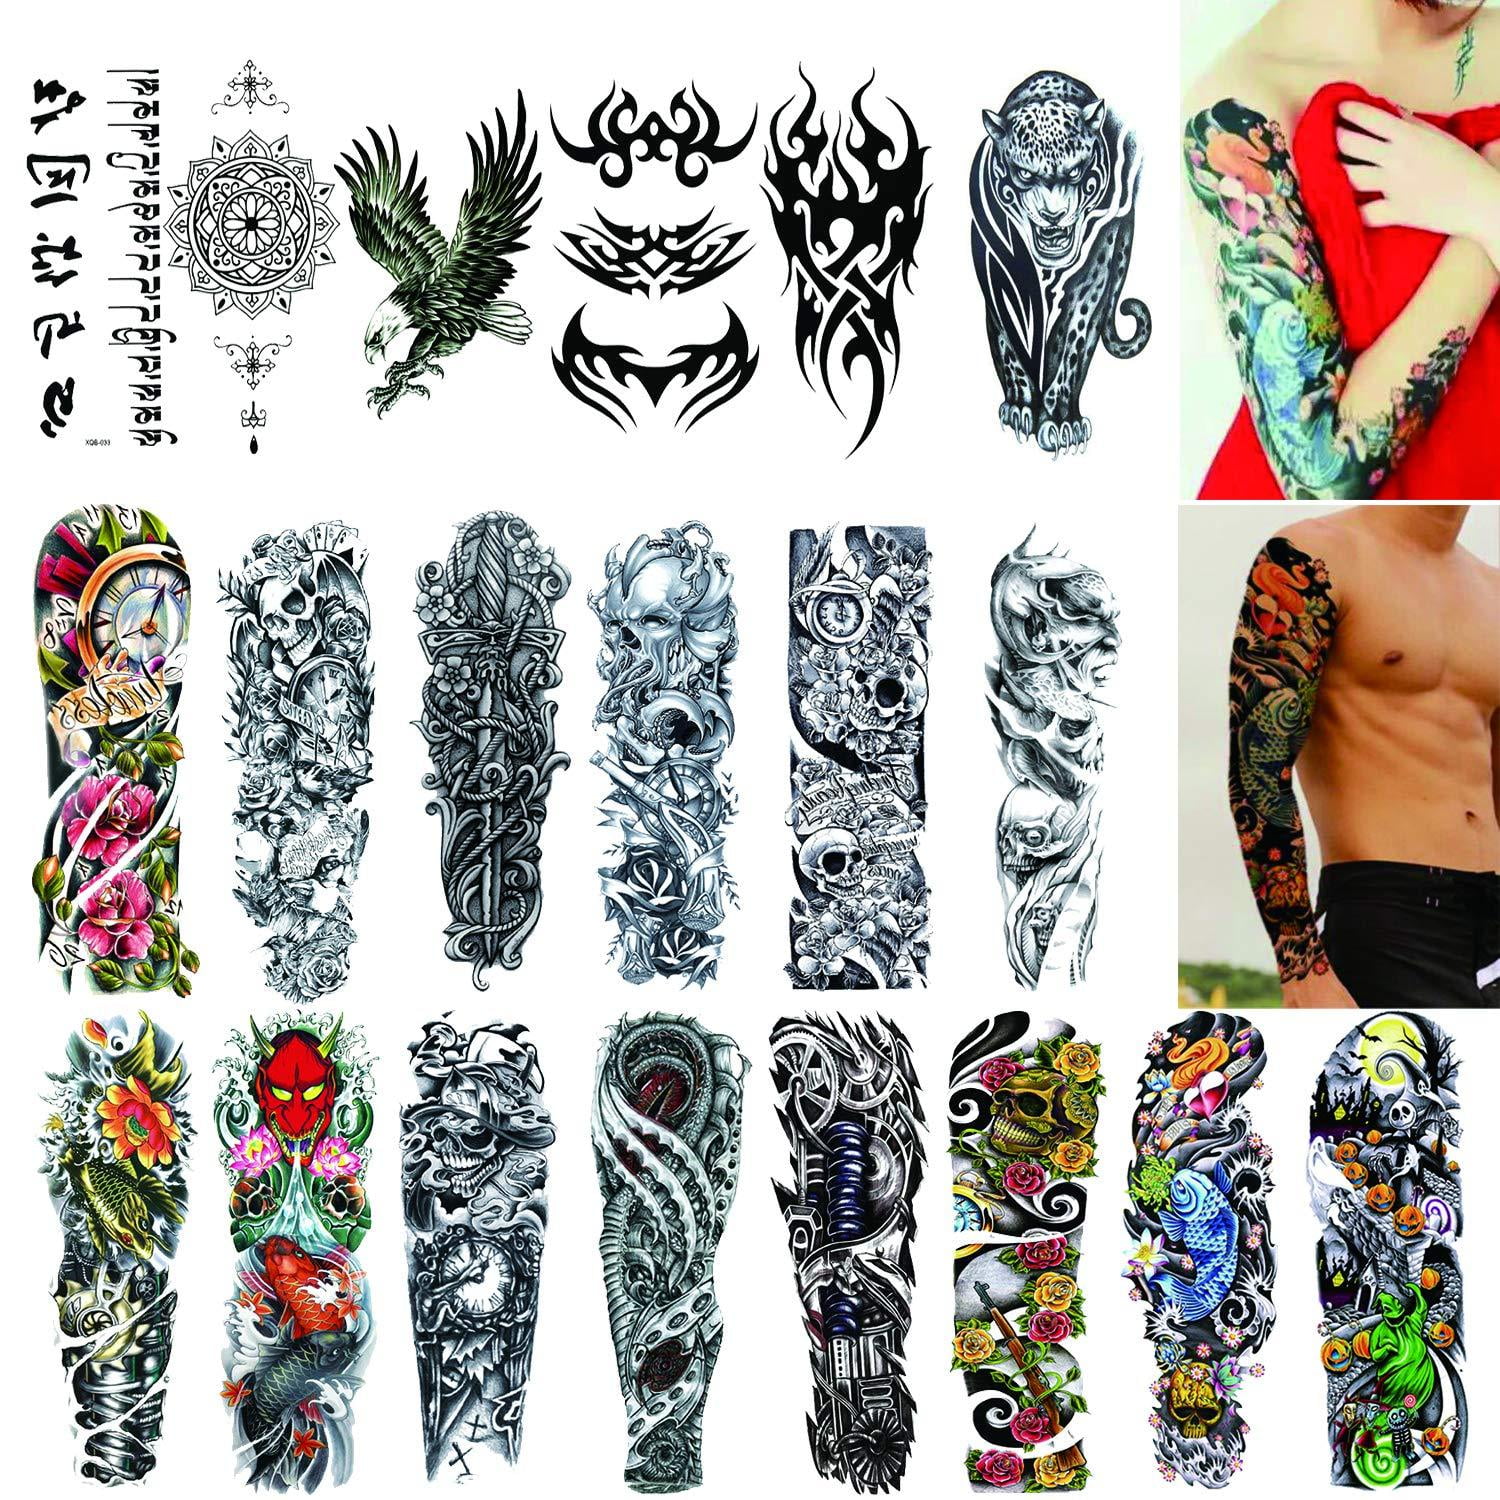 Full Arm Temporary Tattoos 20 Sheets,Tattoo Sleeves for Men and Women ...